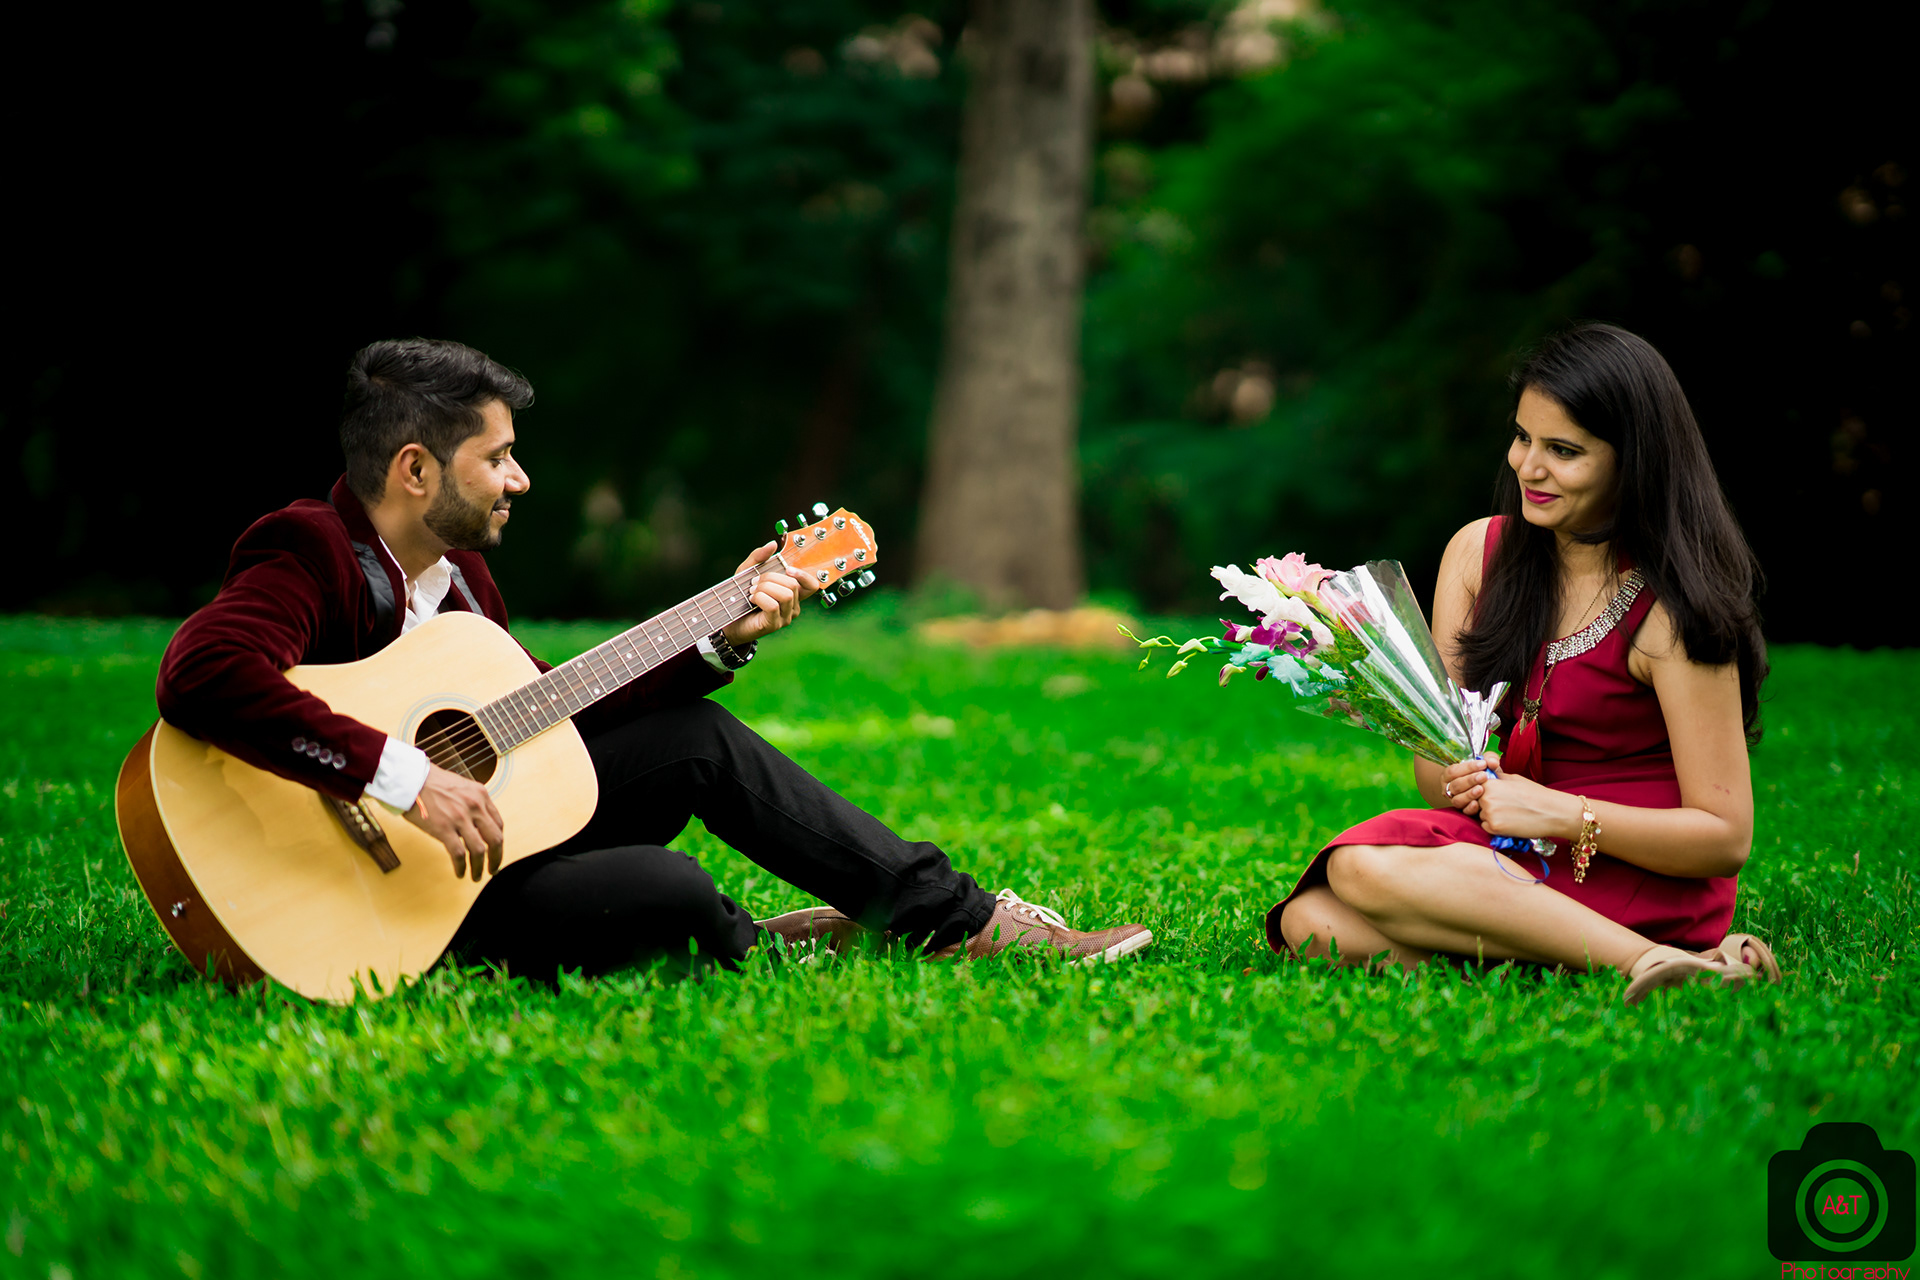 Young Couple Walking In A Romantic Mood With Guitar Outdoors In A Park.  Stock Photo, Picture and Royalty Free Image. Image 90798160.